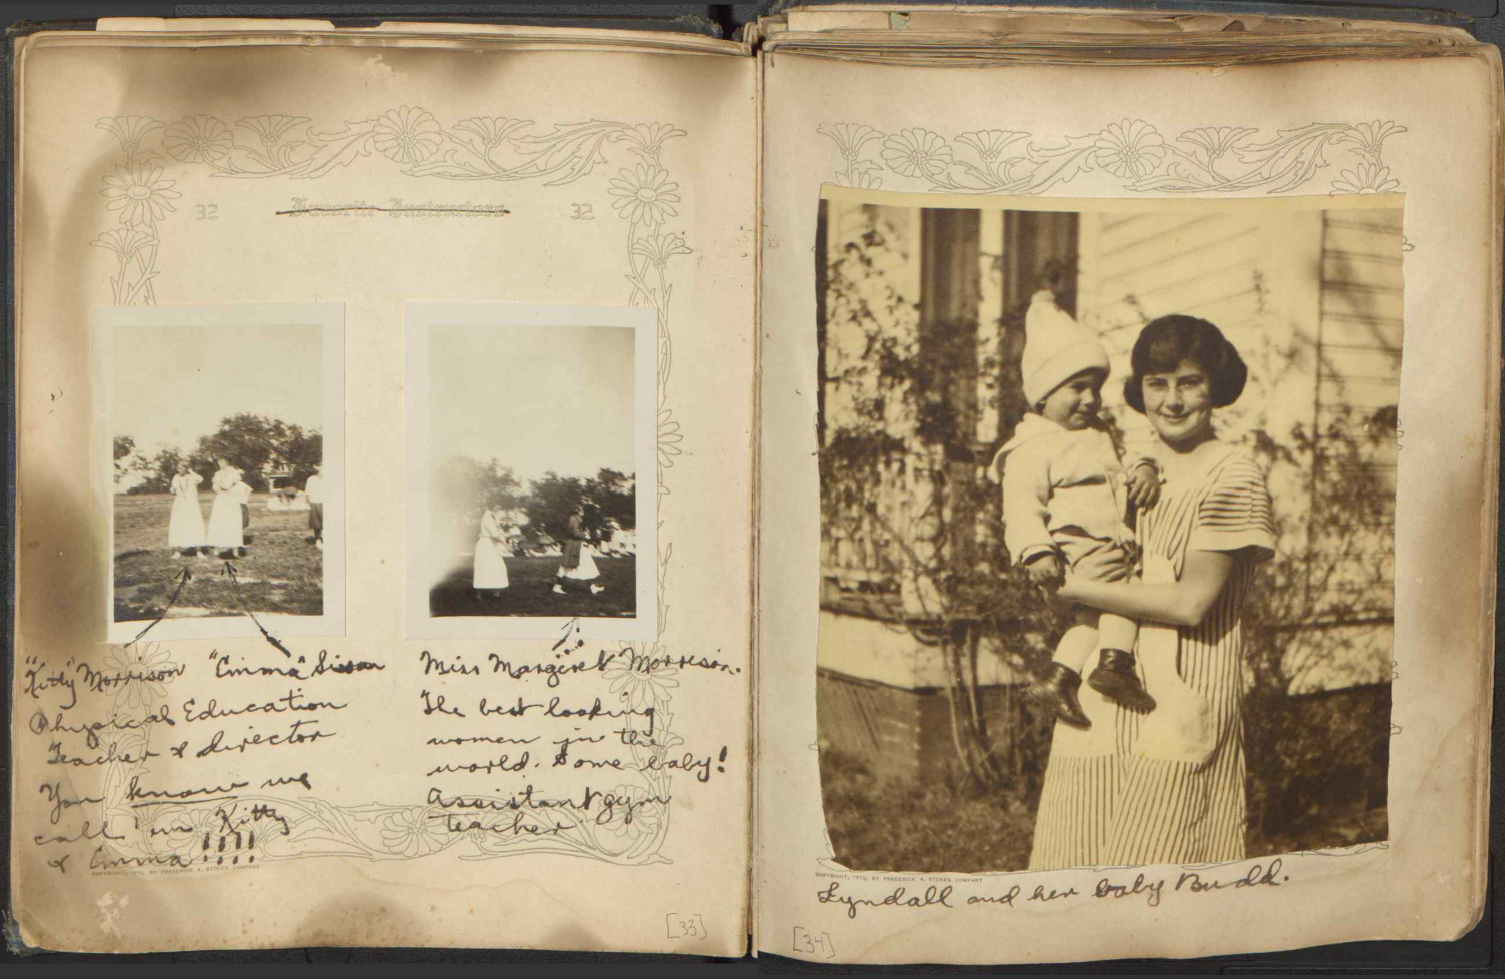 Image of aged scrapbook pages digitized from Belmont University's Special Collections.